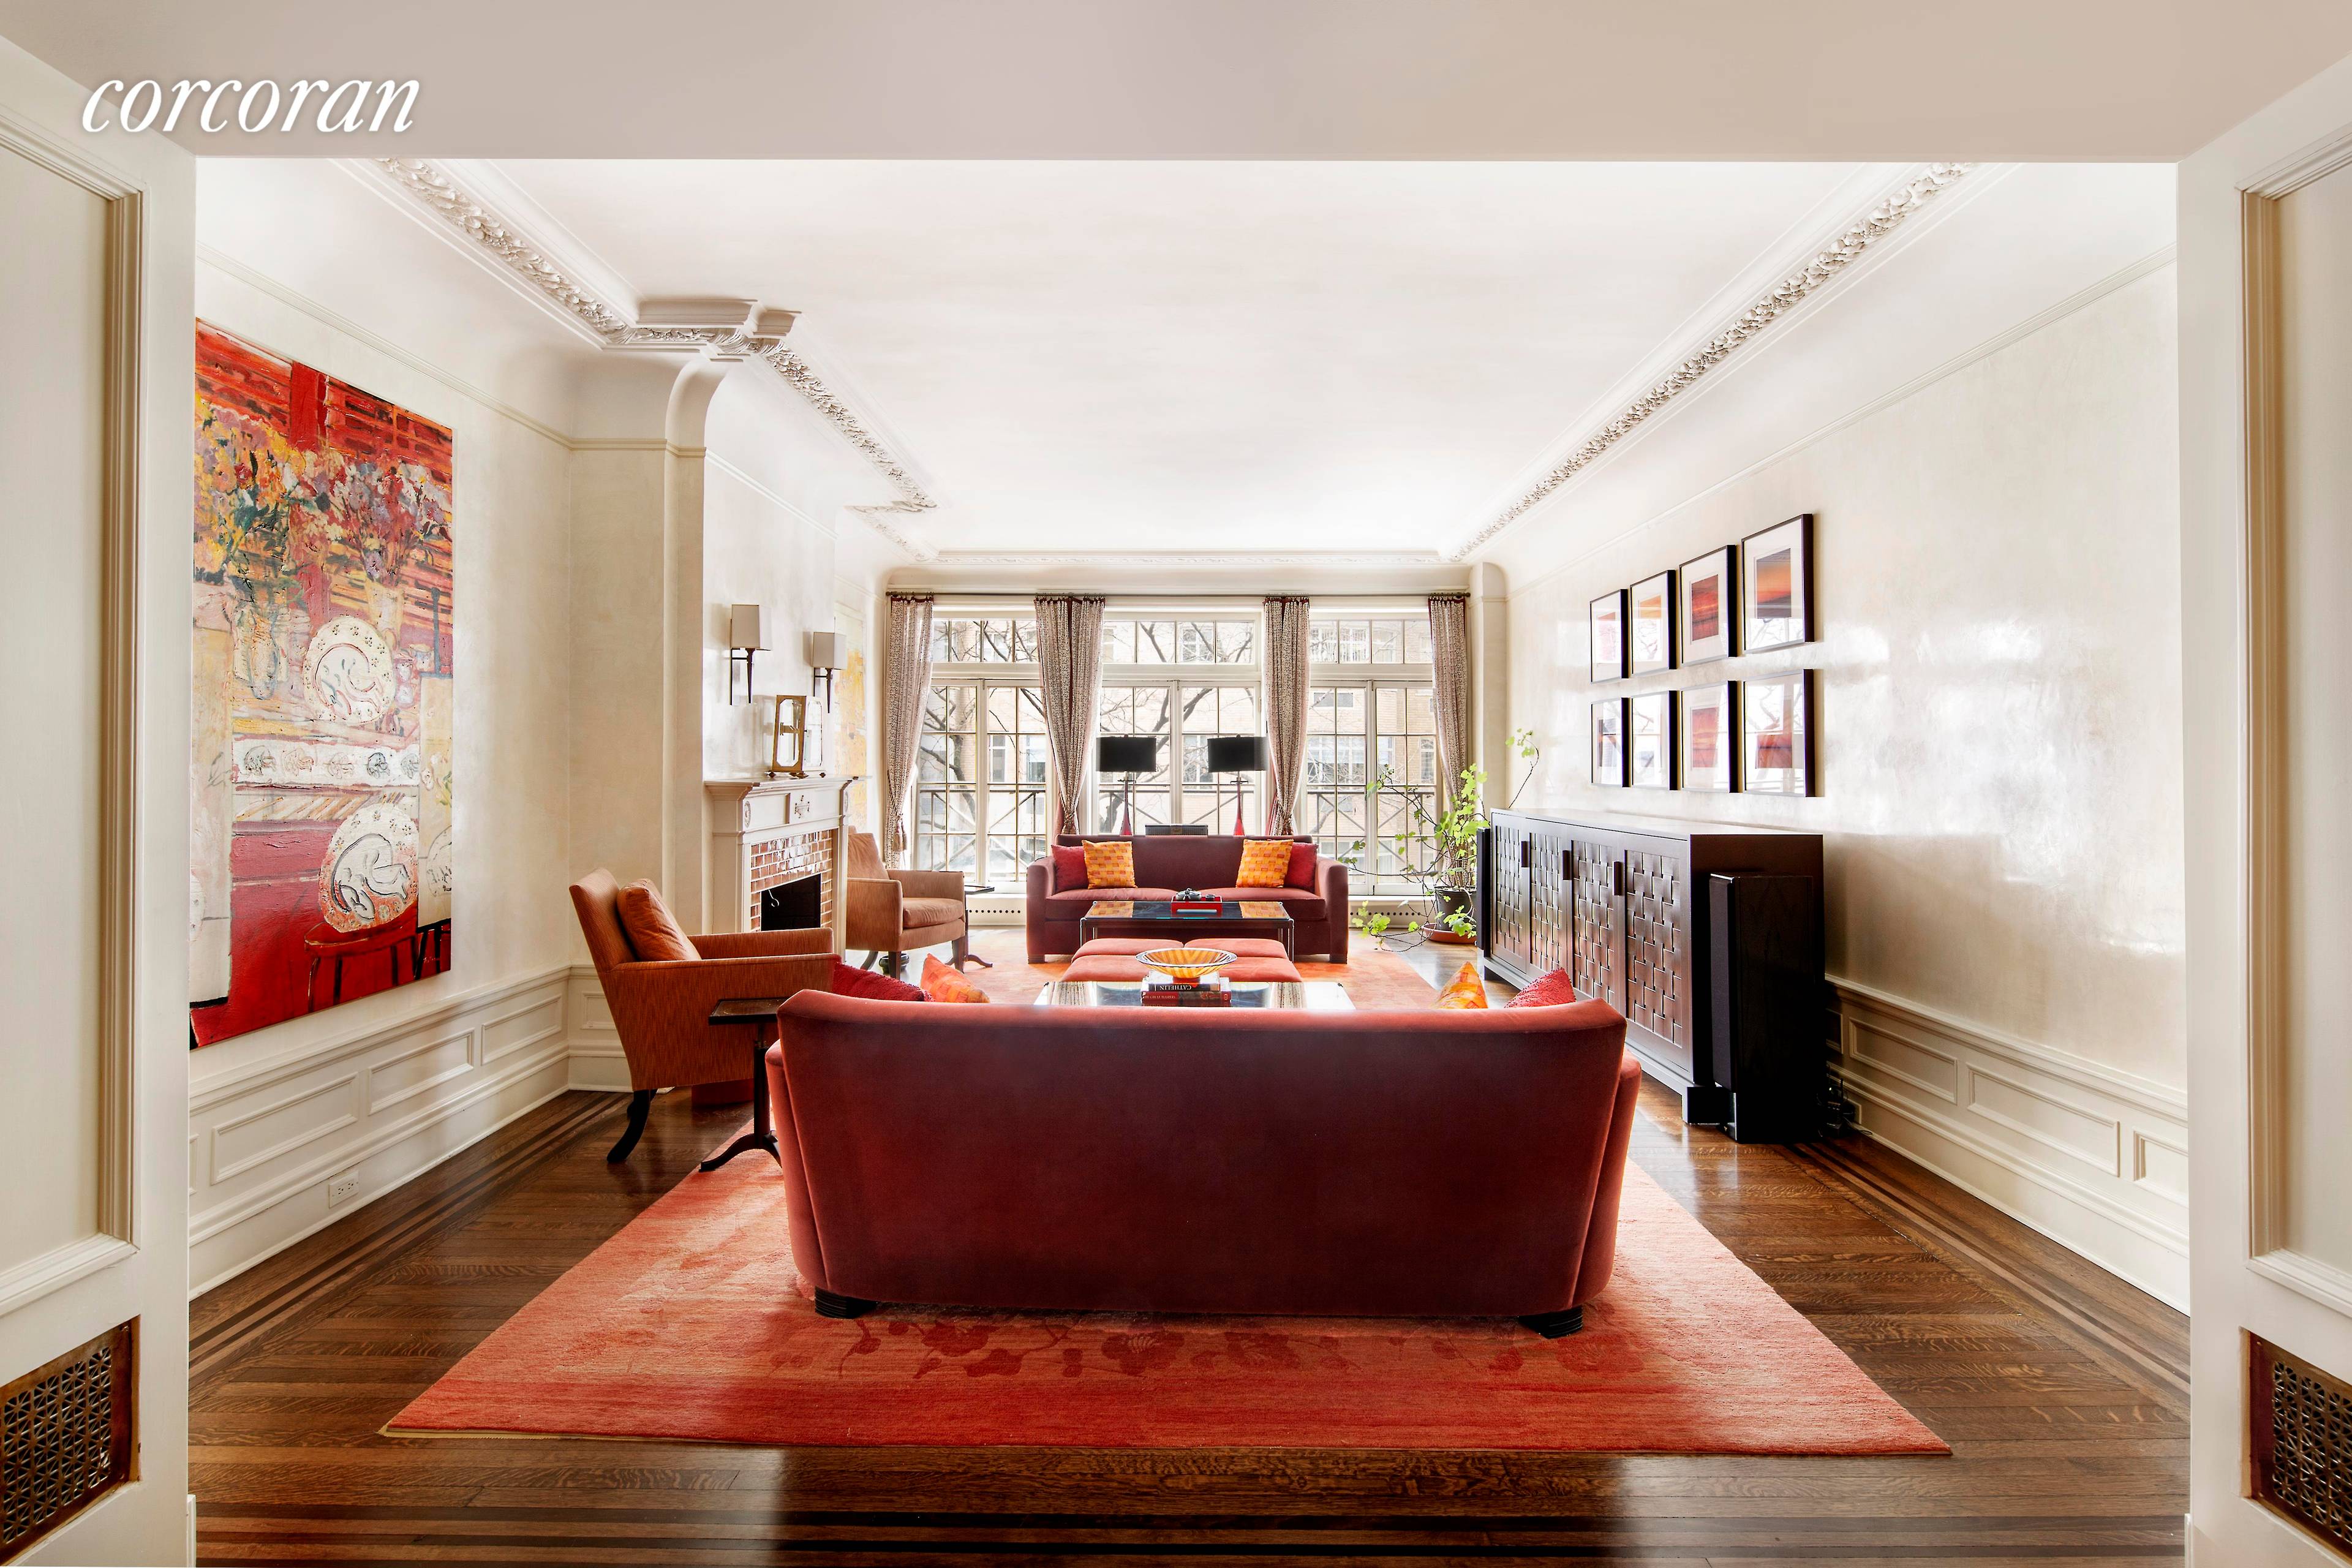 Perfectly positioned Park Avenue Duplex Modern living meets prewar charm in this original duplex, the only floor plan of its kind at 830 Park Avenue.